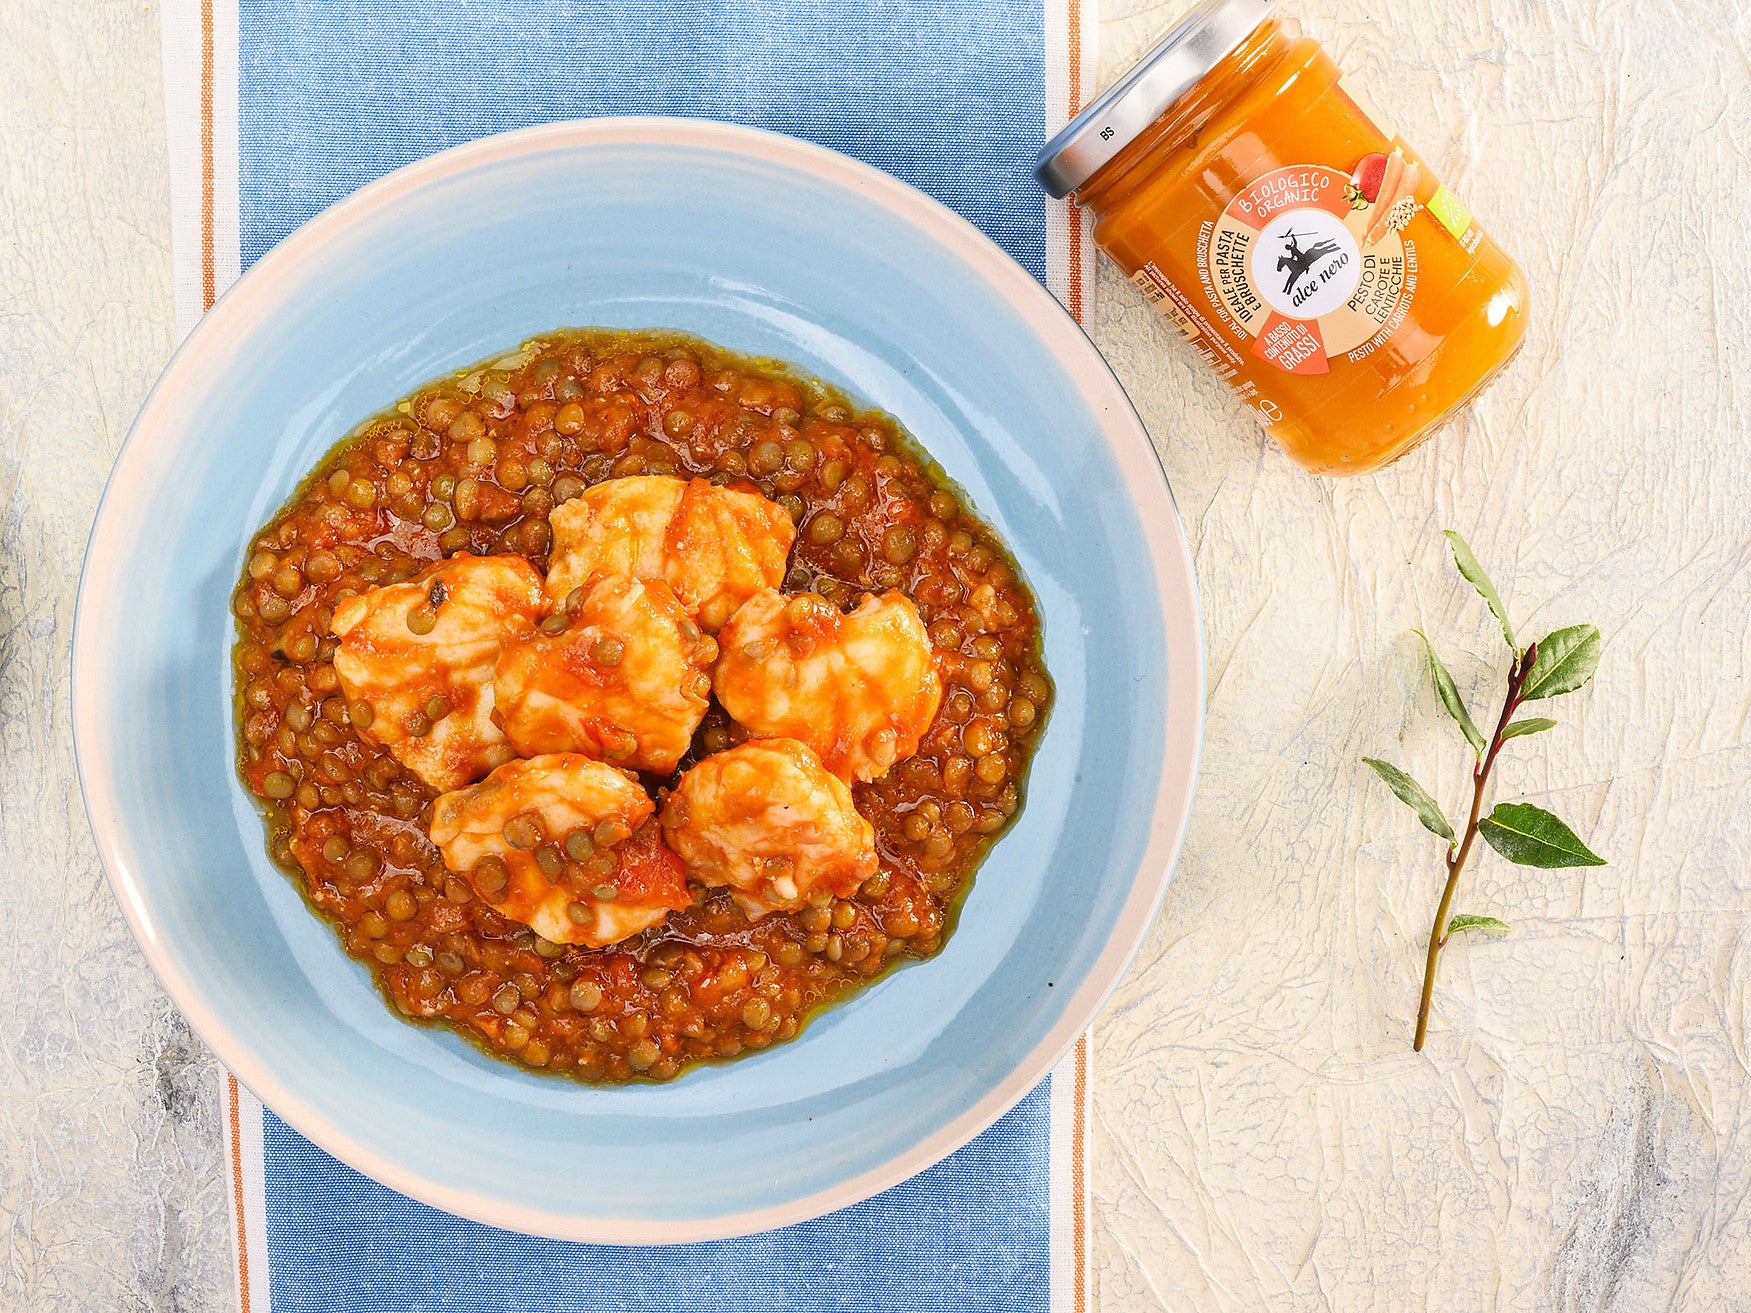 Monkfish stew with carrot and lentil pesto